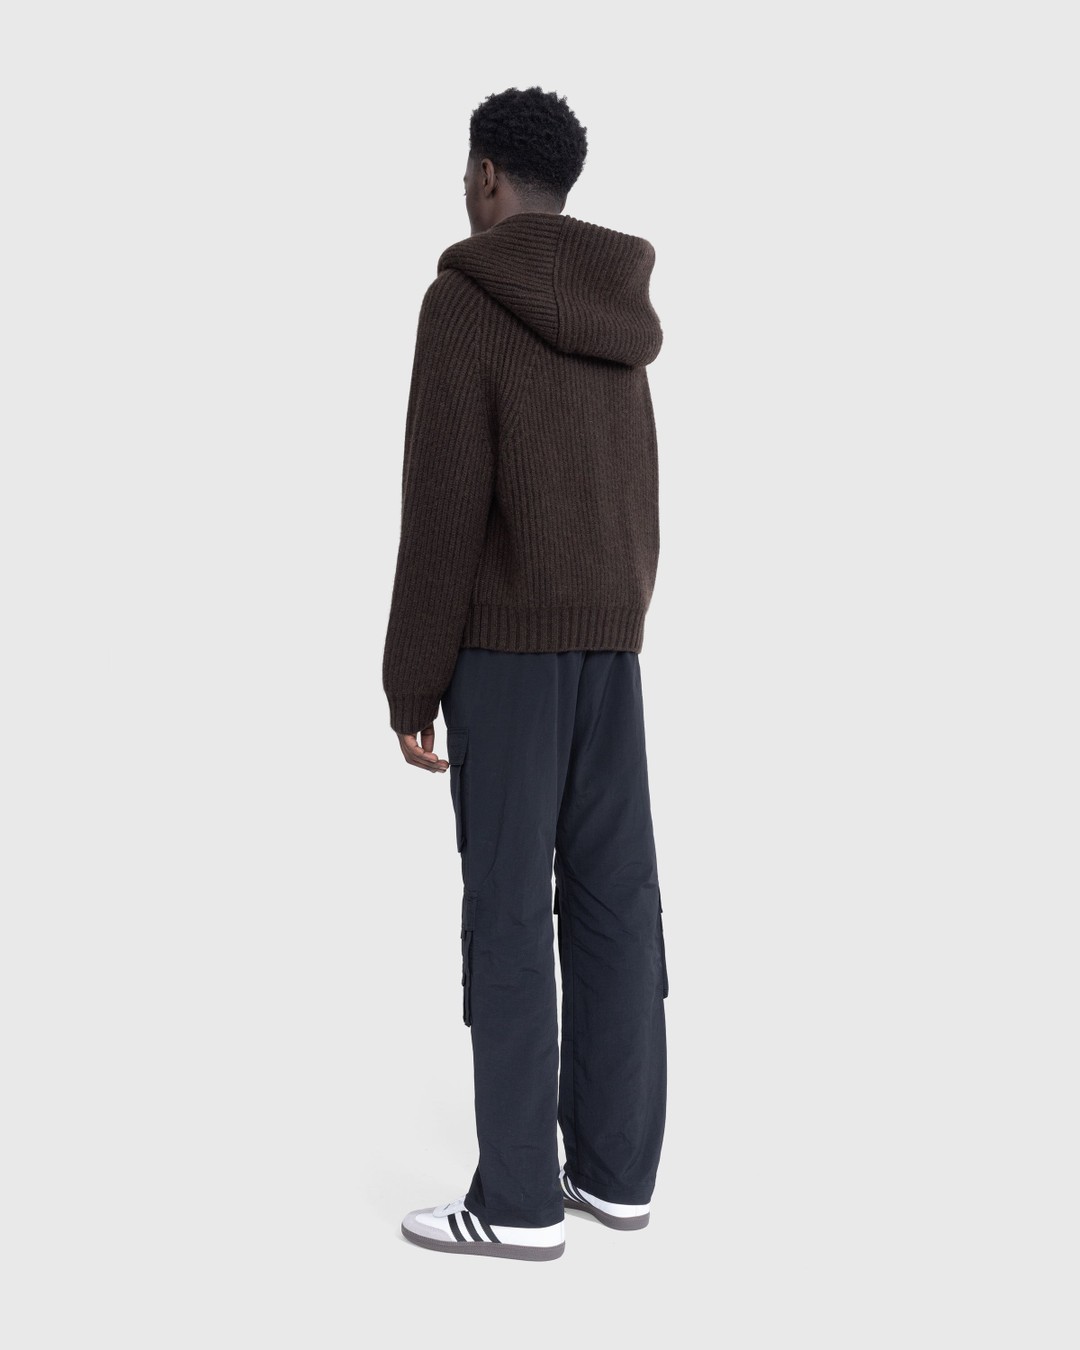 Meta Campania Collective – Michel Exaggerated Rib Cashmere Hooded Cardigan Dark Chocolate Brown - Knitwear - Brown - Image 4